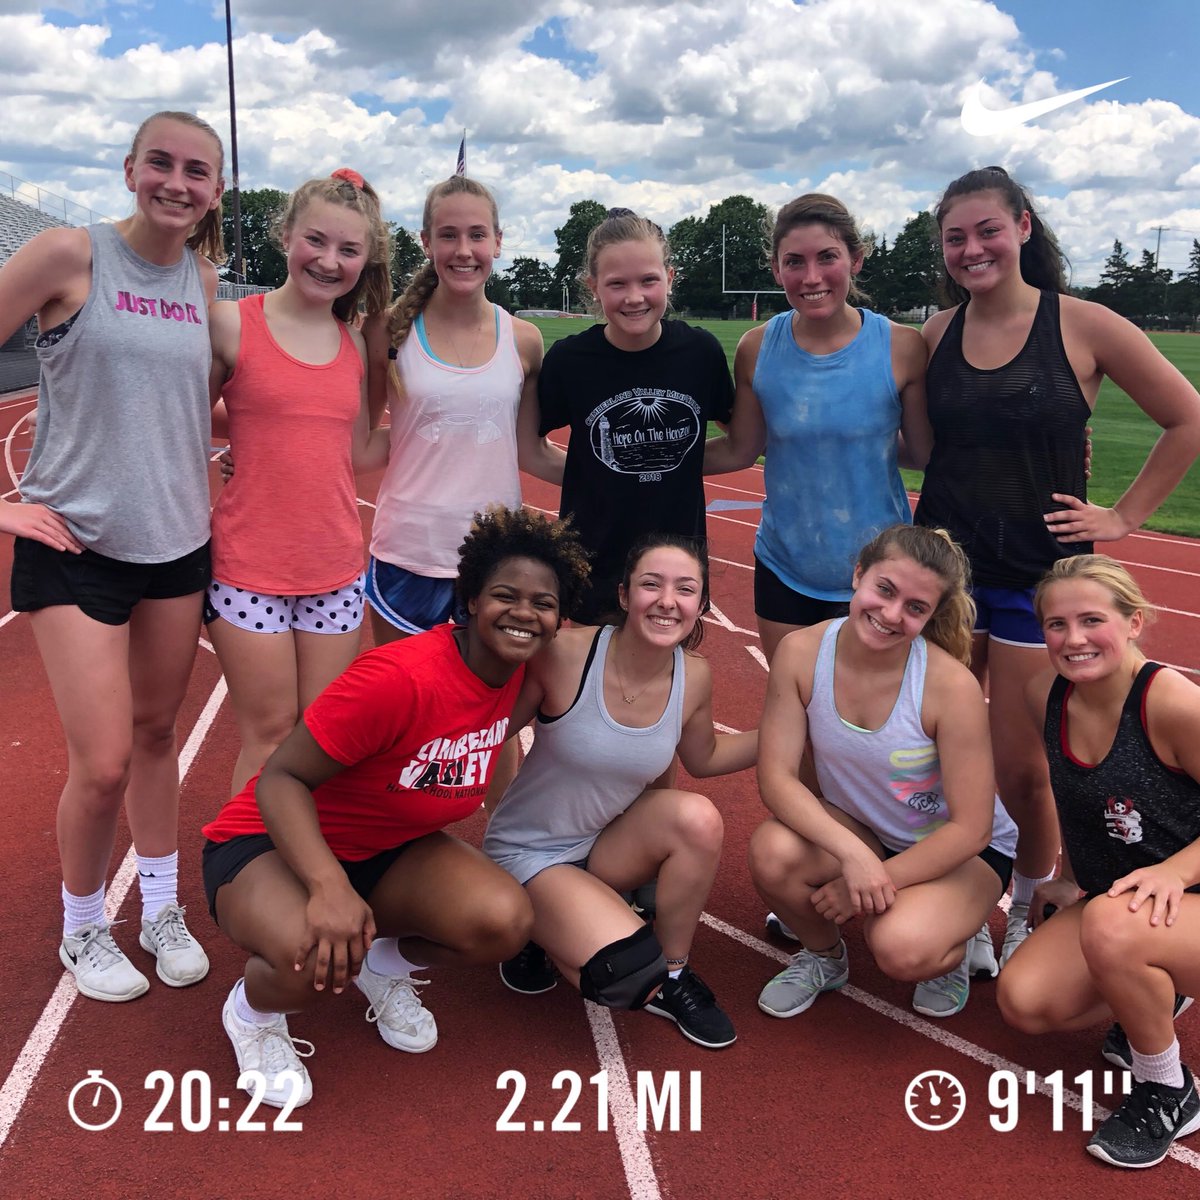 Today’s track workout with these fit ladies! #stronggirls #FridayMotivation #fridayfitness #exercise #workout #cheer #cheerleading #trackworkout